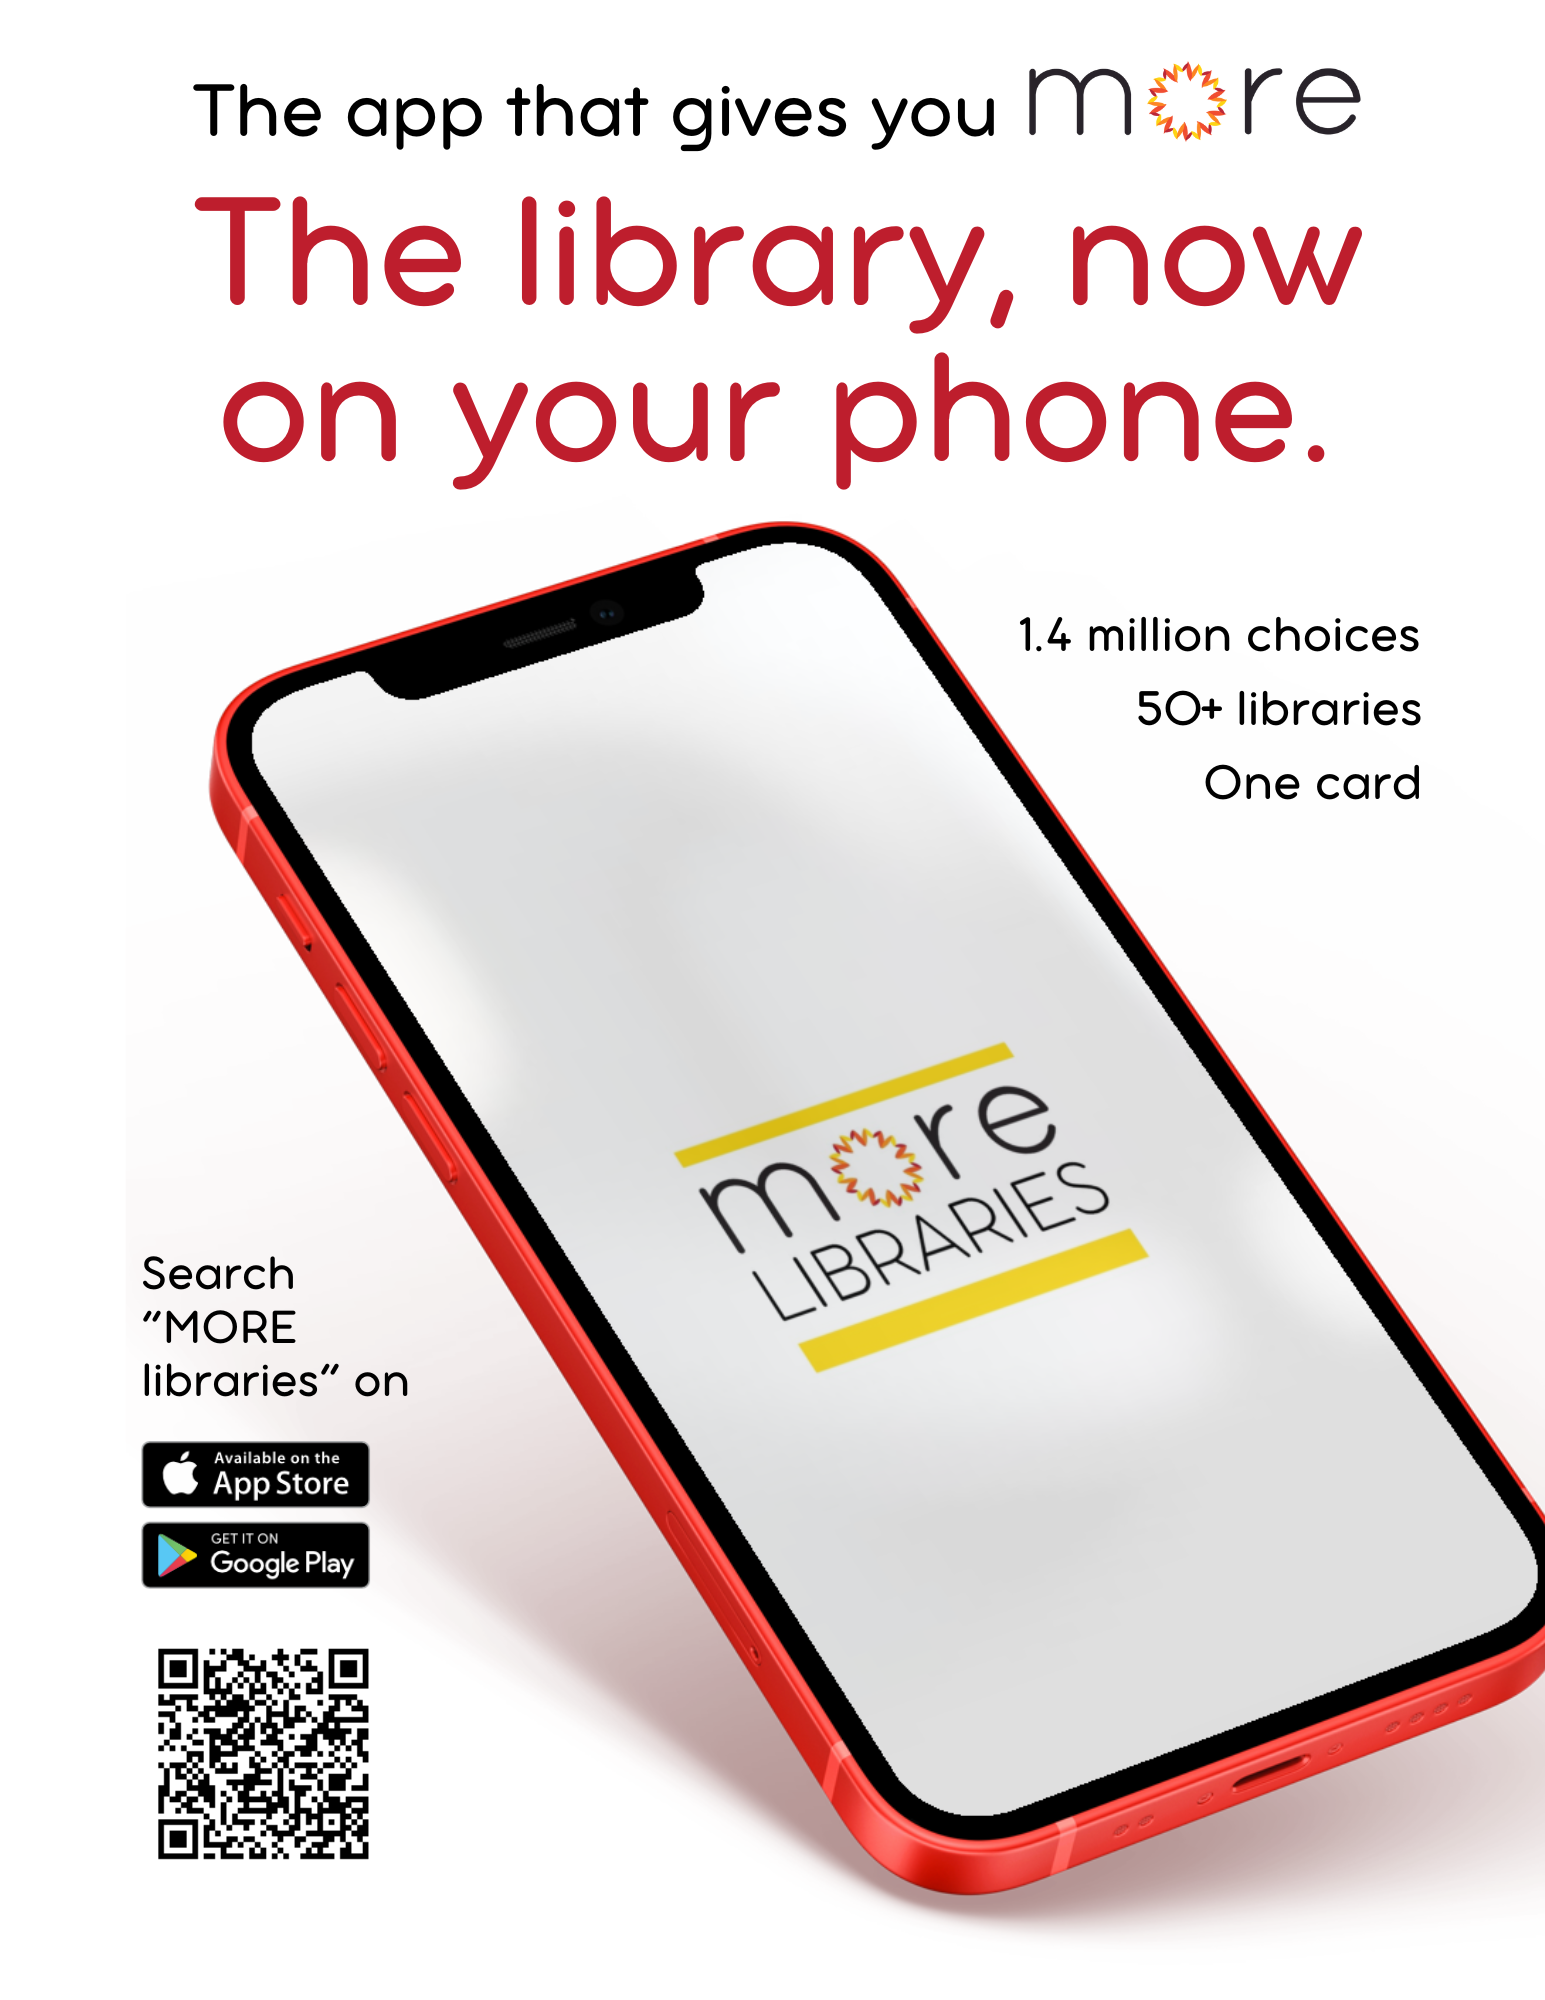 The Library. Now in your pocket.